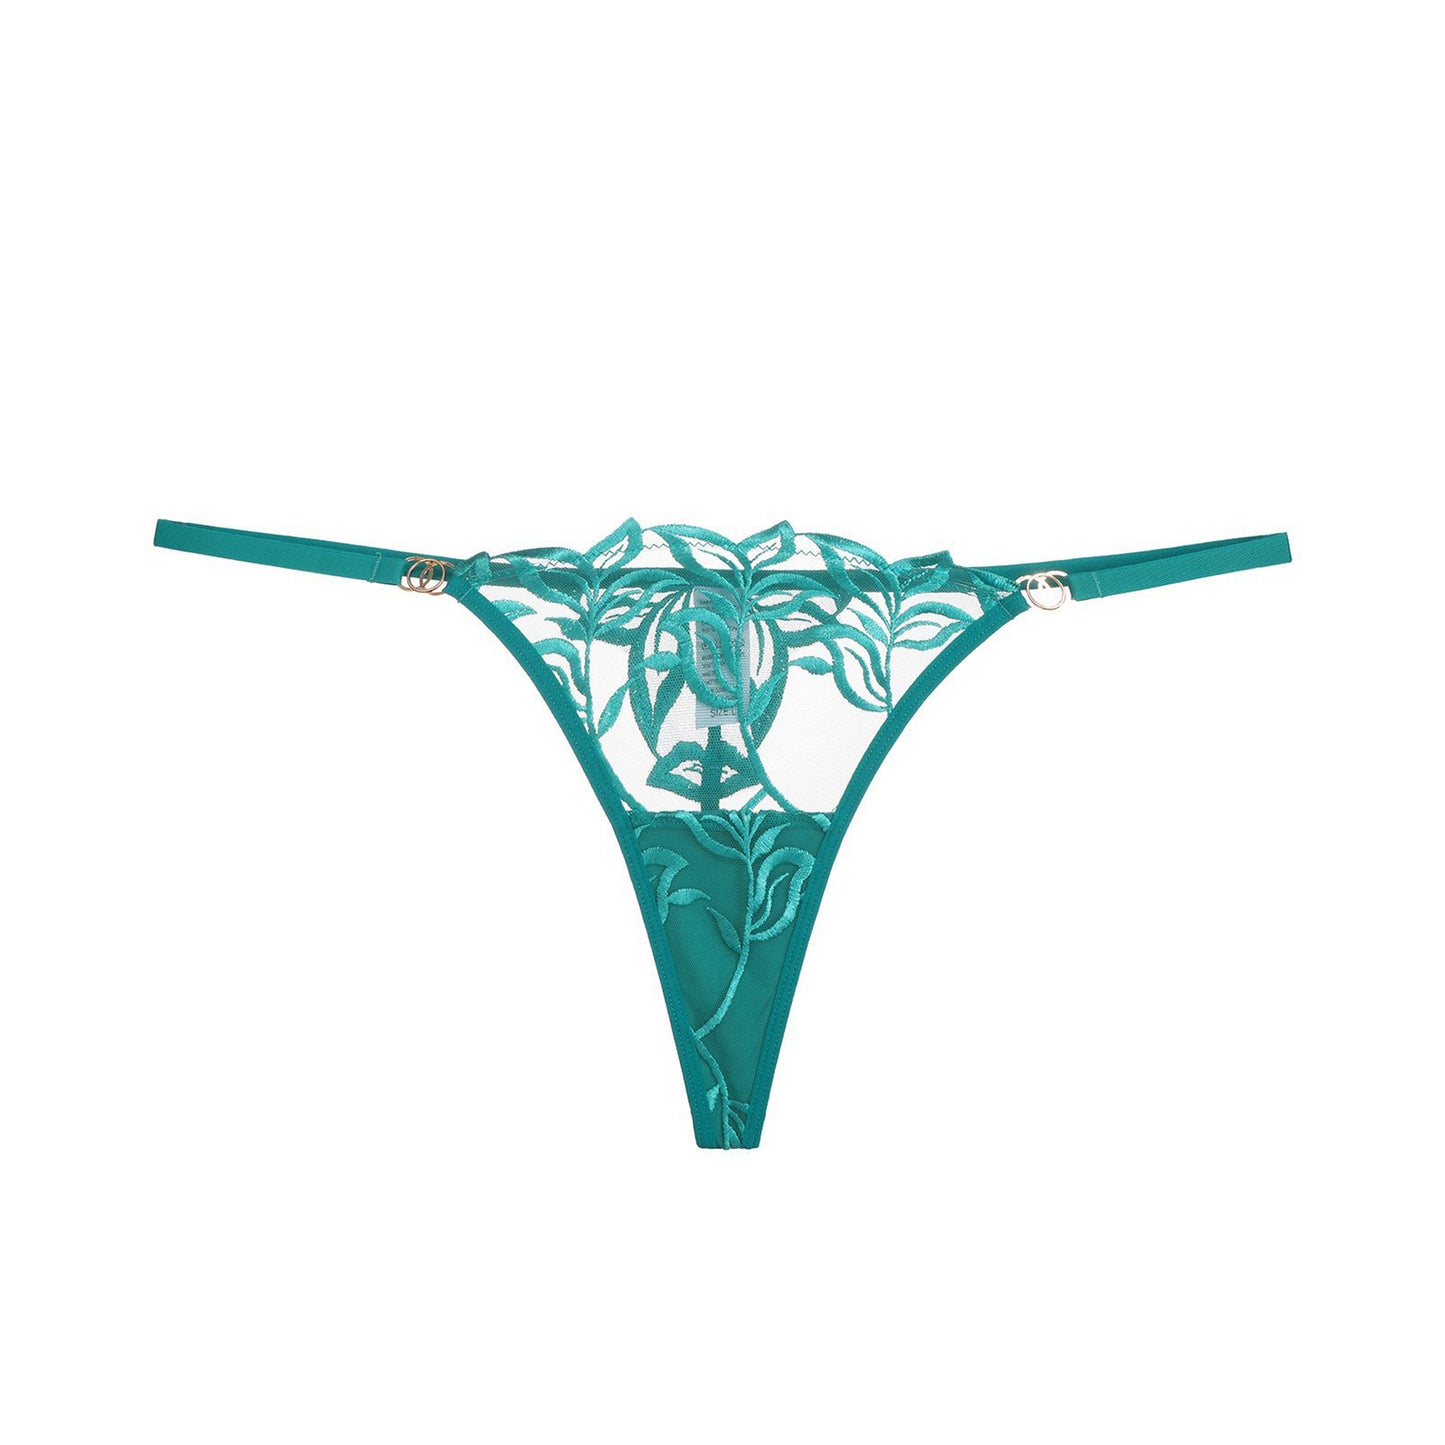 Lace Embroidered Leaf Pattern Thong